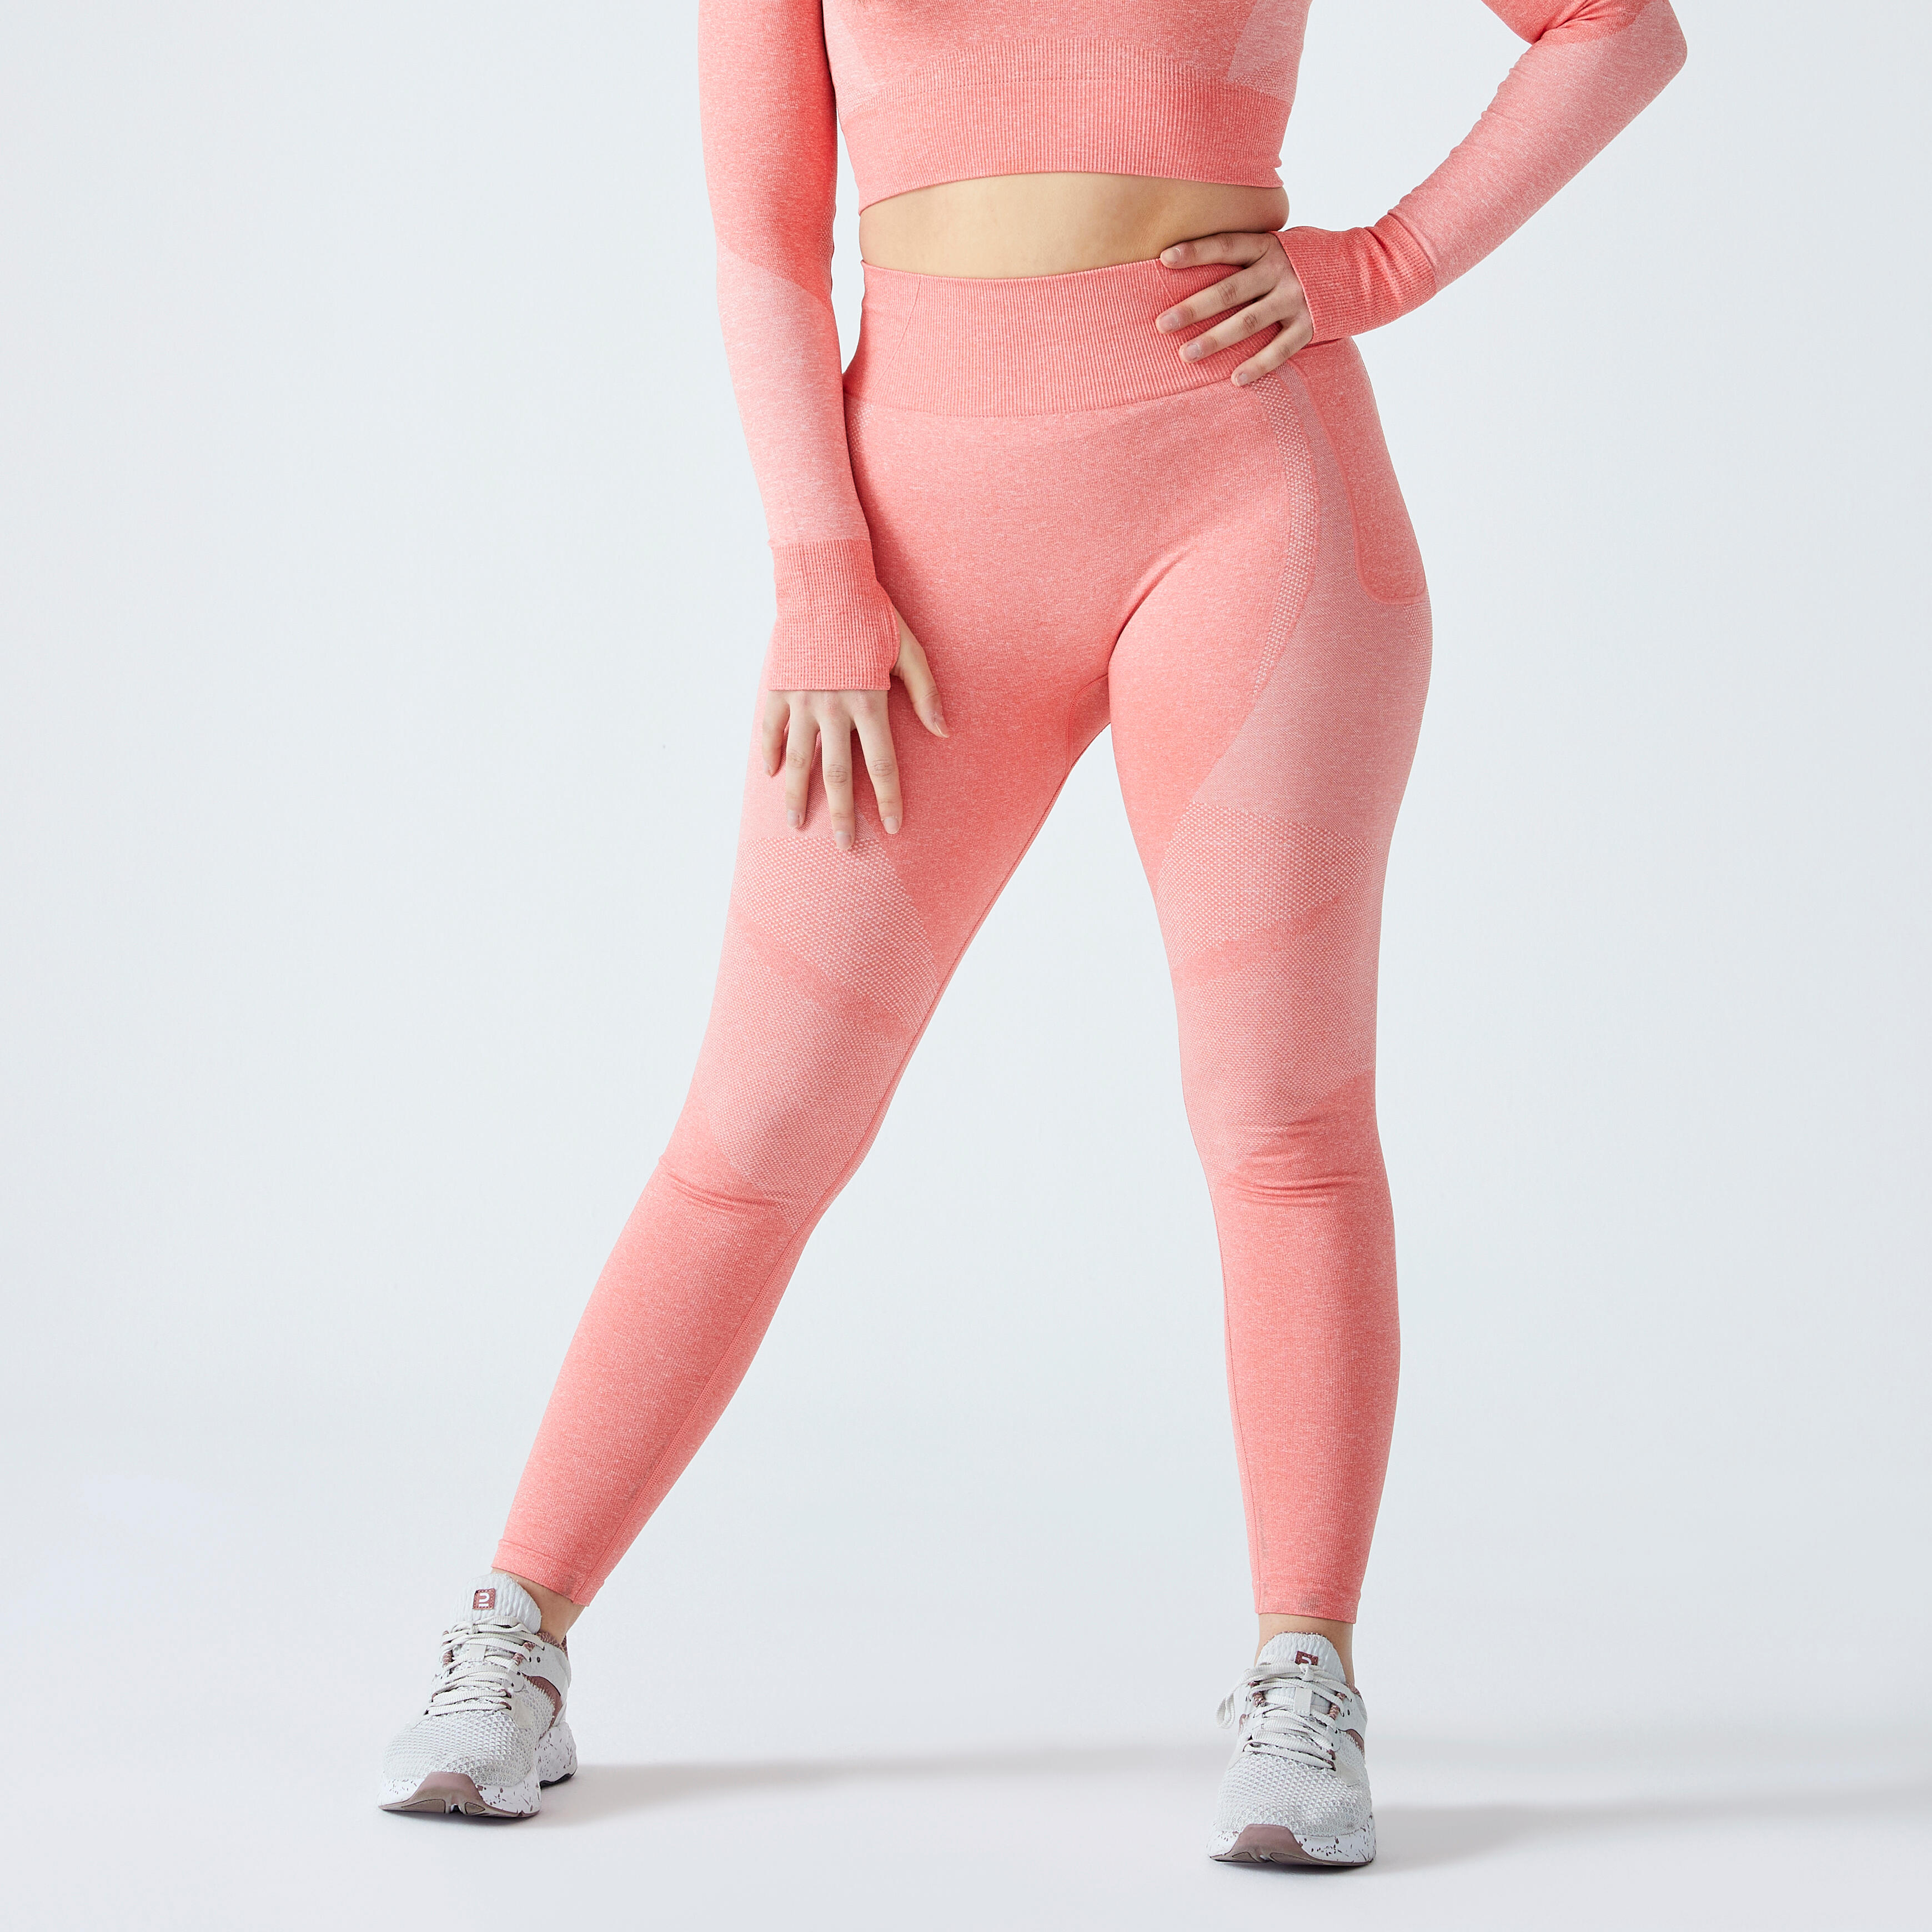 High-Quality Leggings: Lorna Jane Amy Phone Pocket Full Length Tech Leggings  | 11 Pieces From Lorna Jane That Will Hold Up During Your Toughest Workouts  | POPSUGAR Fitness UK Photo 2